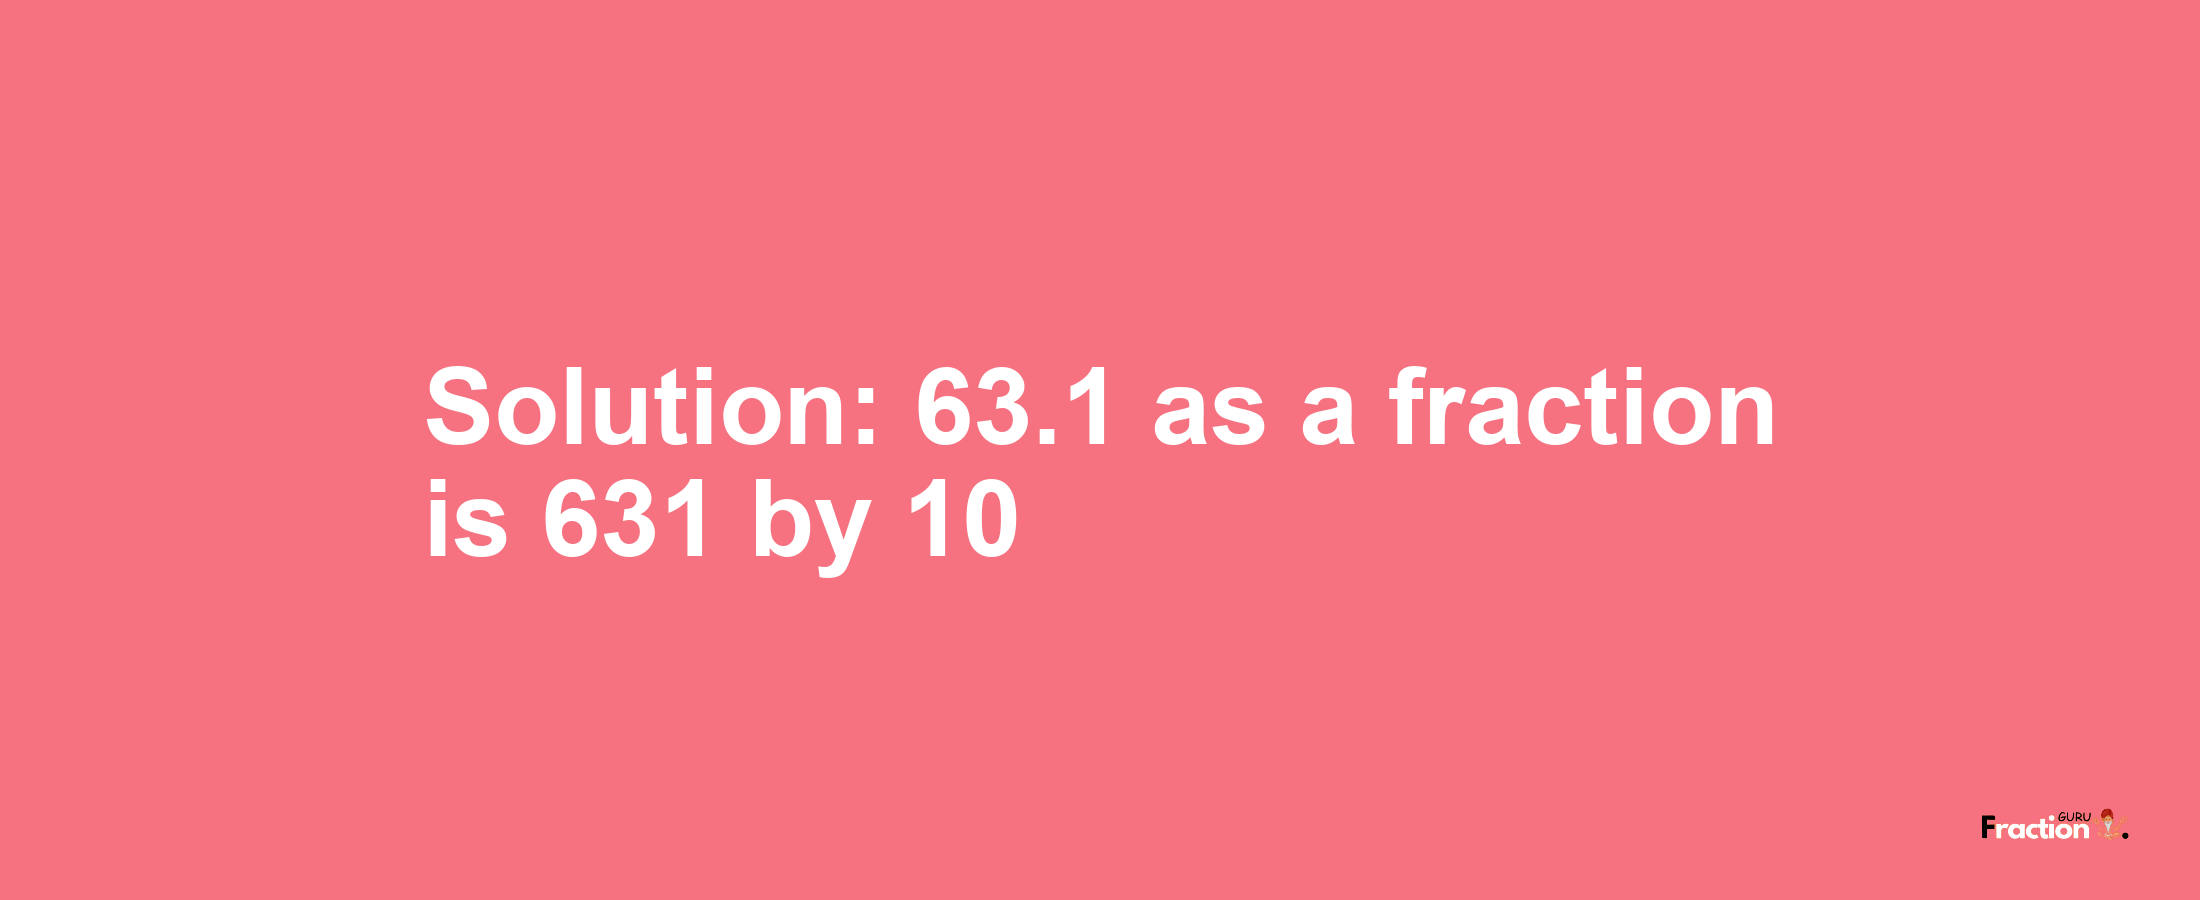 Solution:63.1 as a fraction is 631/10